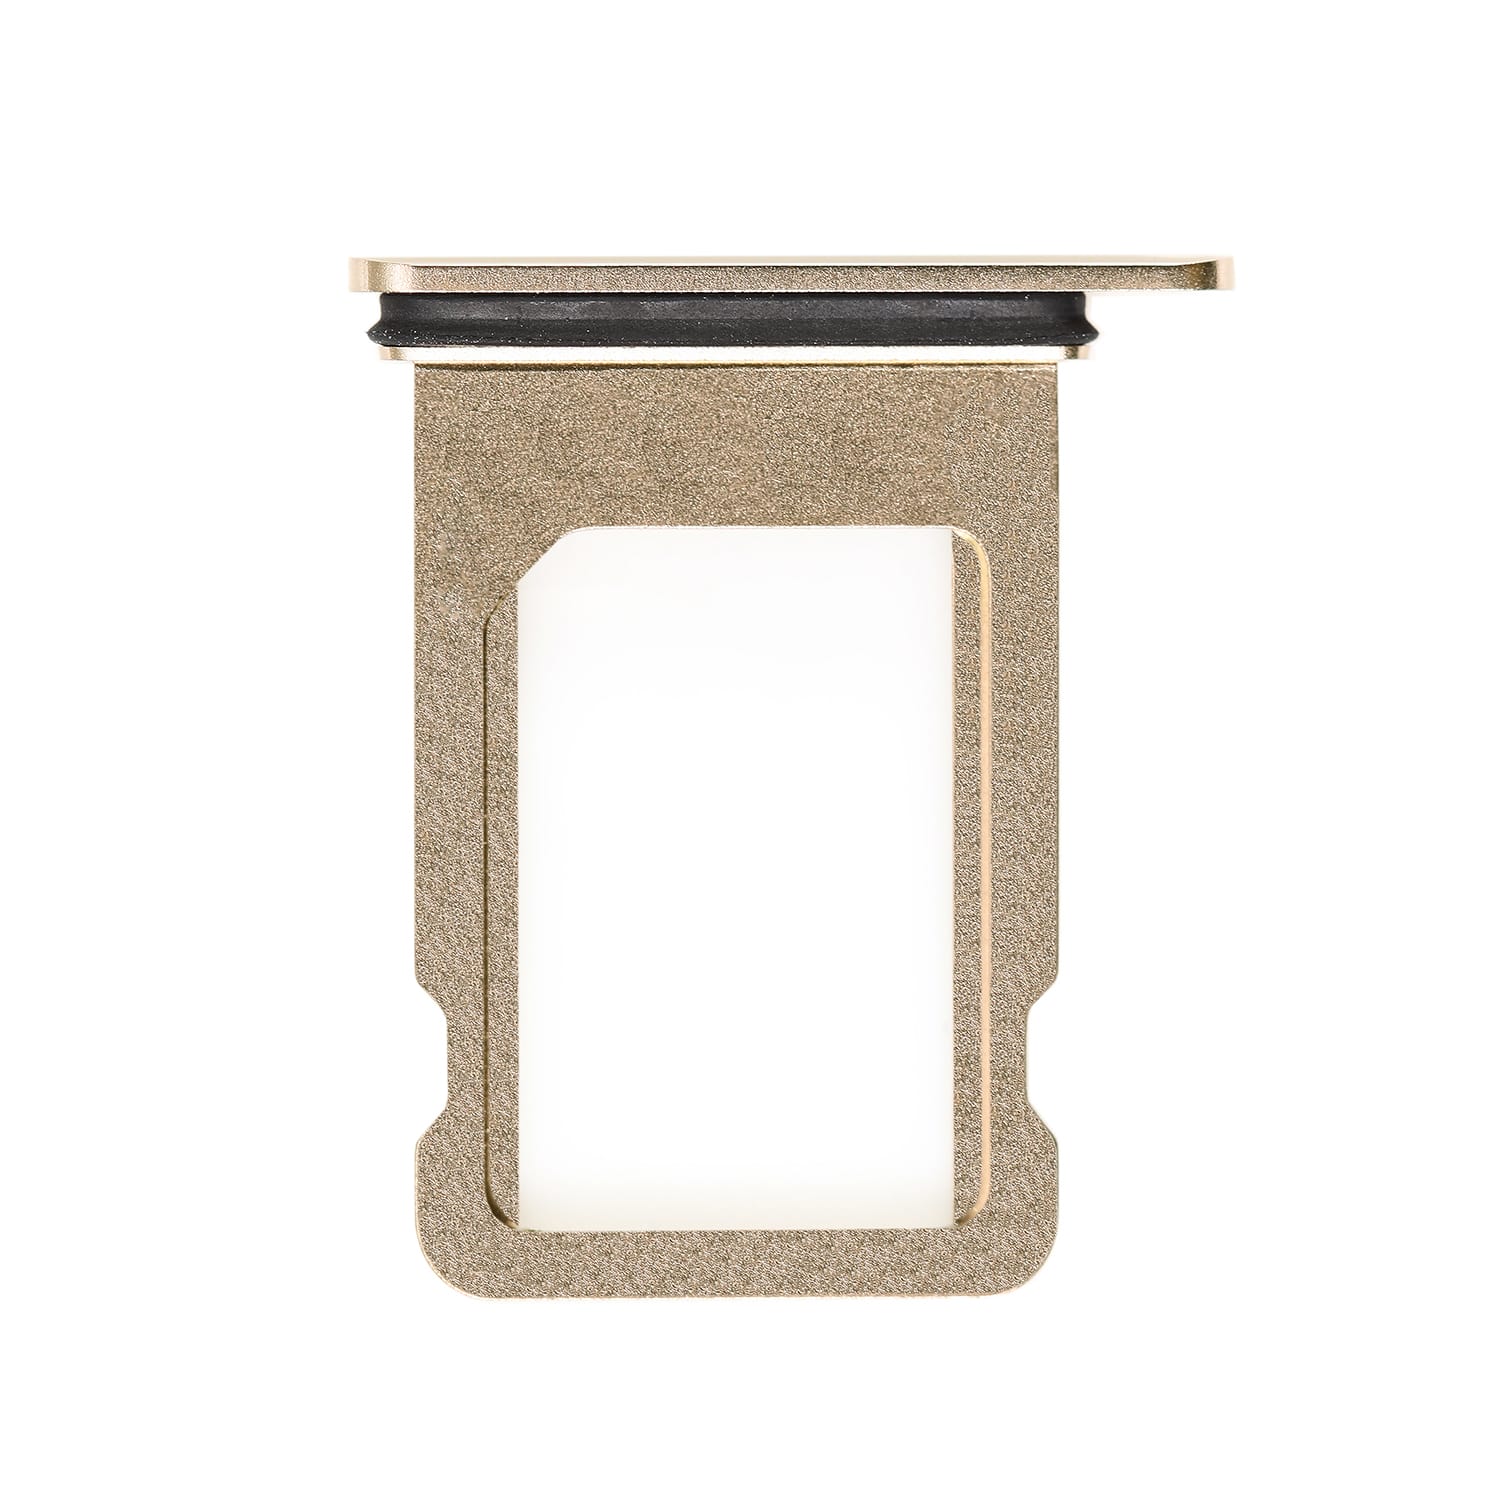 SIM CARD TRAY - GOLD FOR IPHONE XS